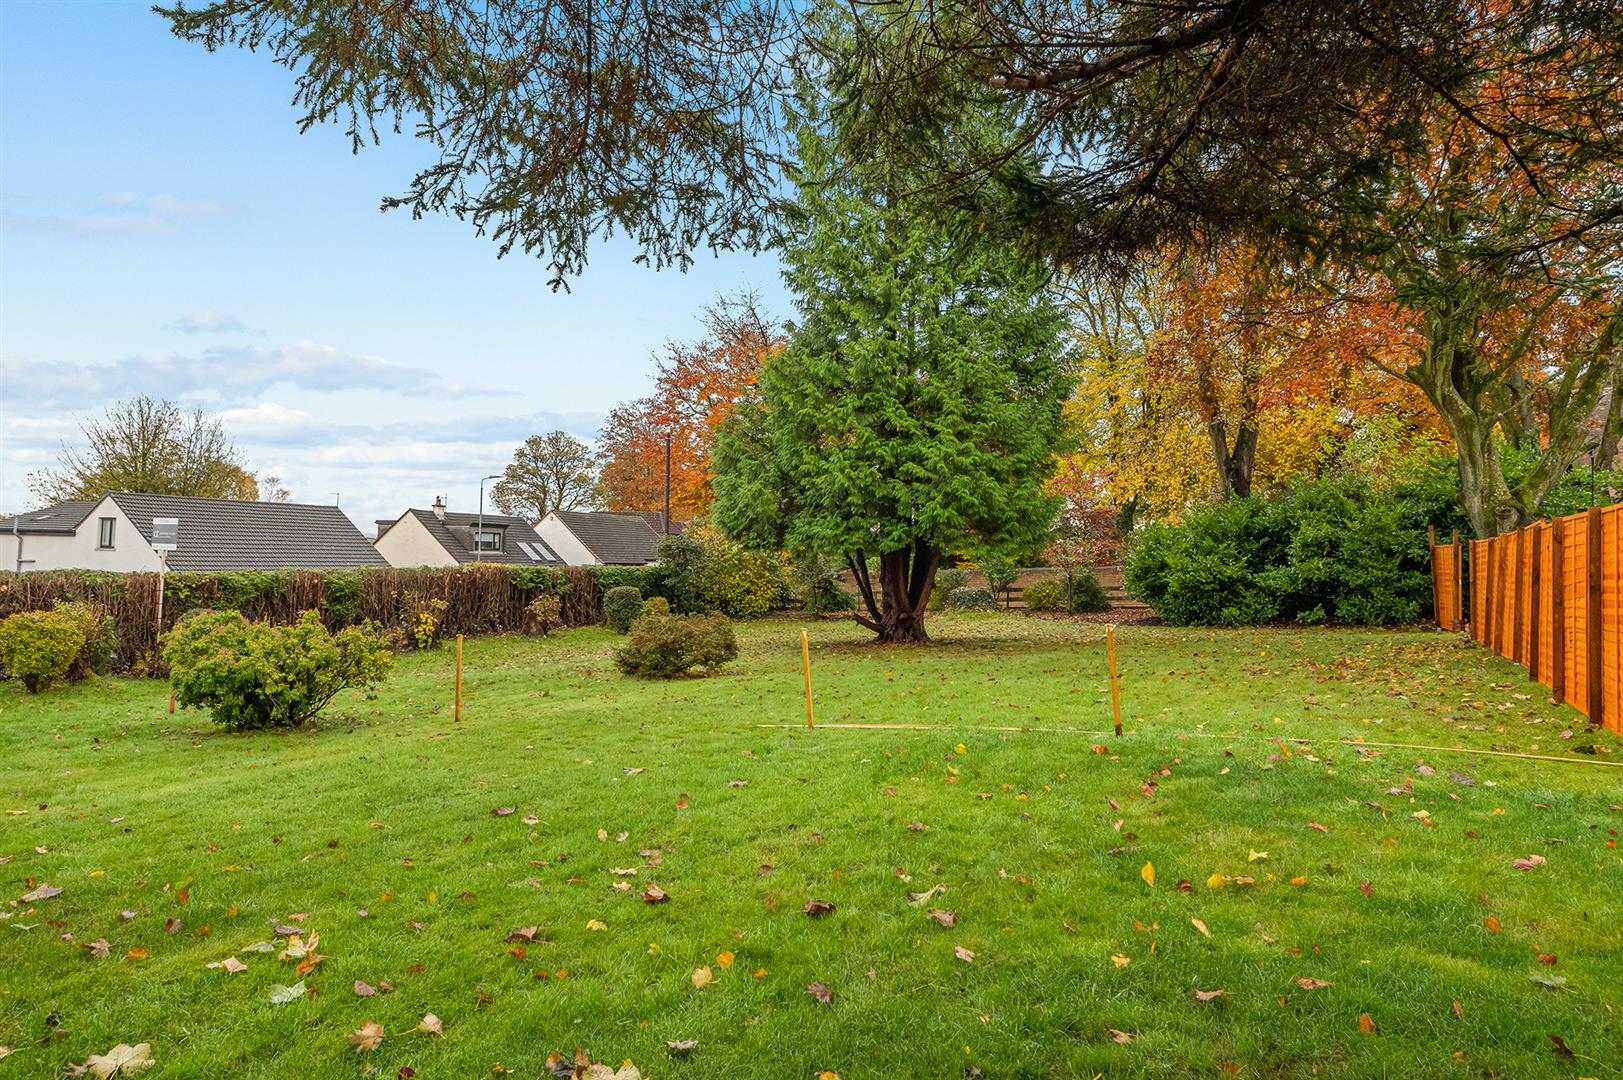 4 bed land (residential) for sale in Airlie House Carronvale Road, Larbert  - Property Image 4